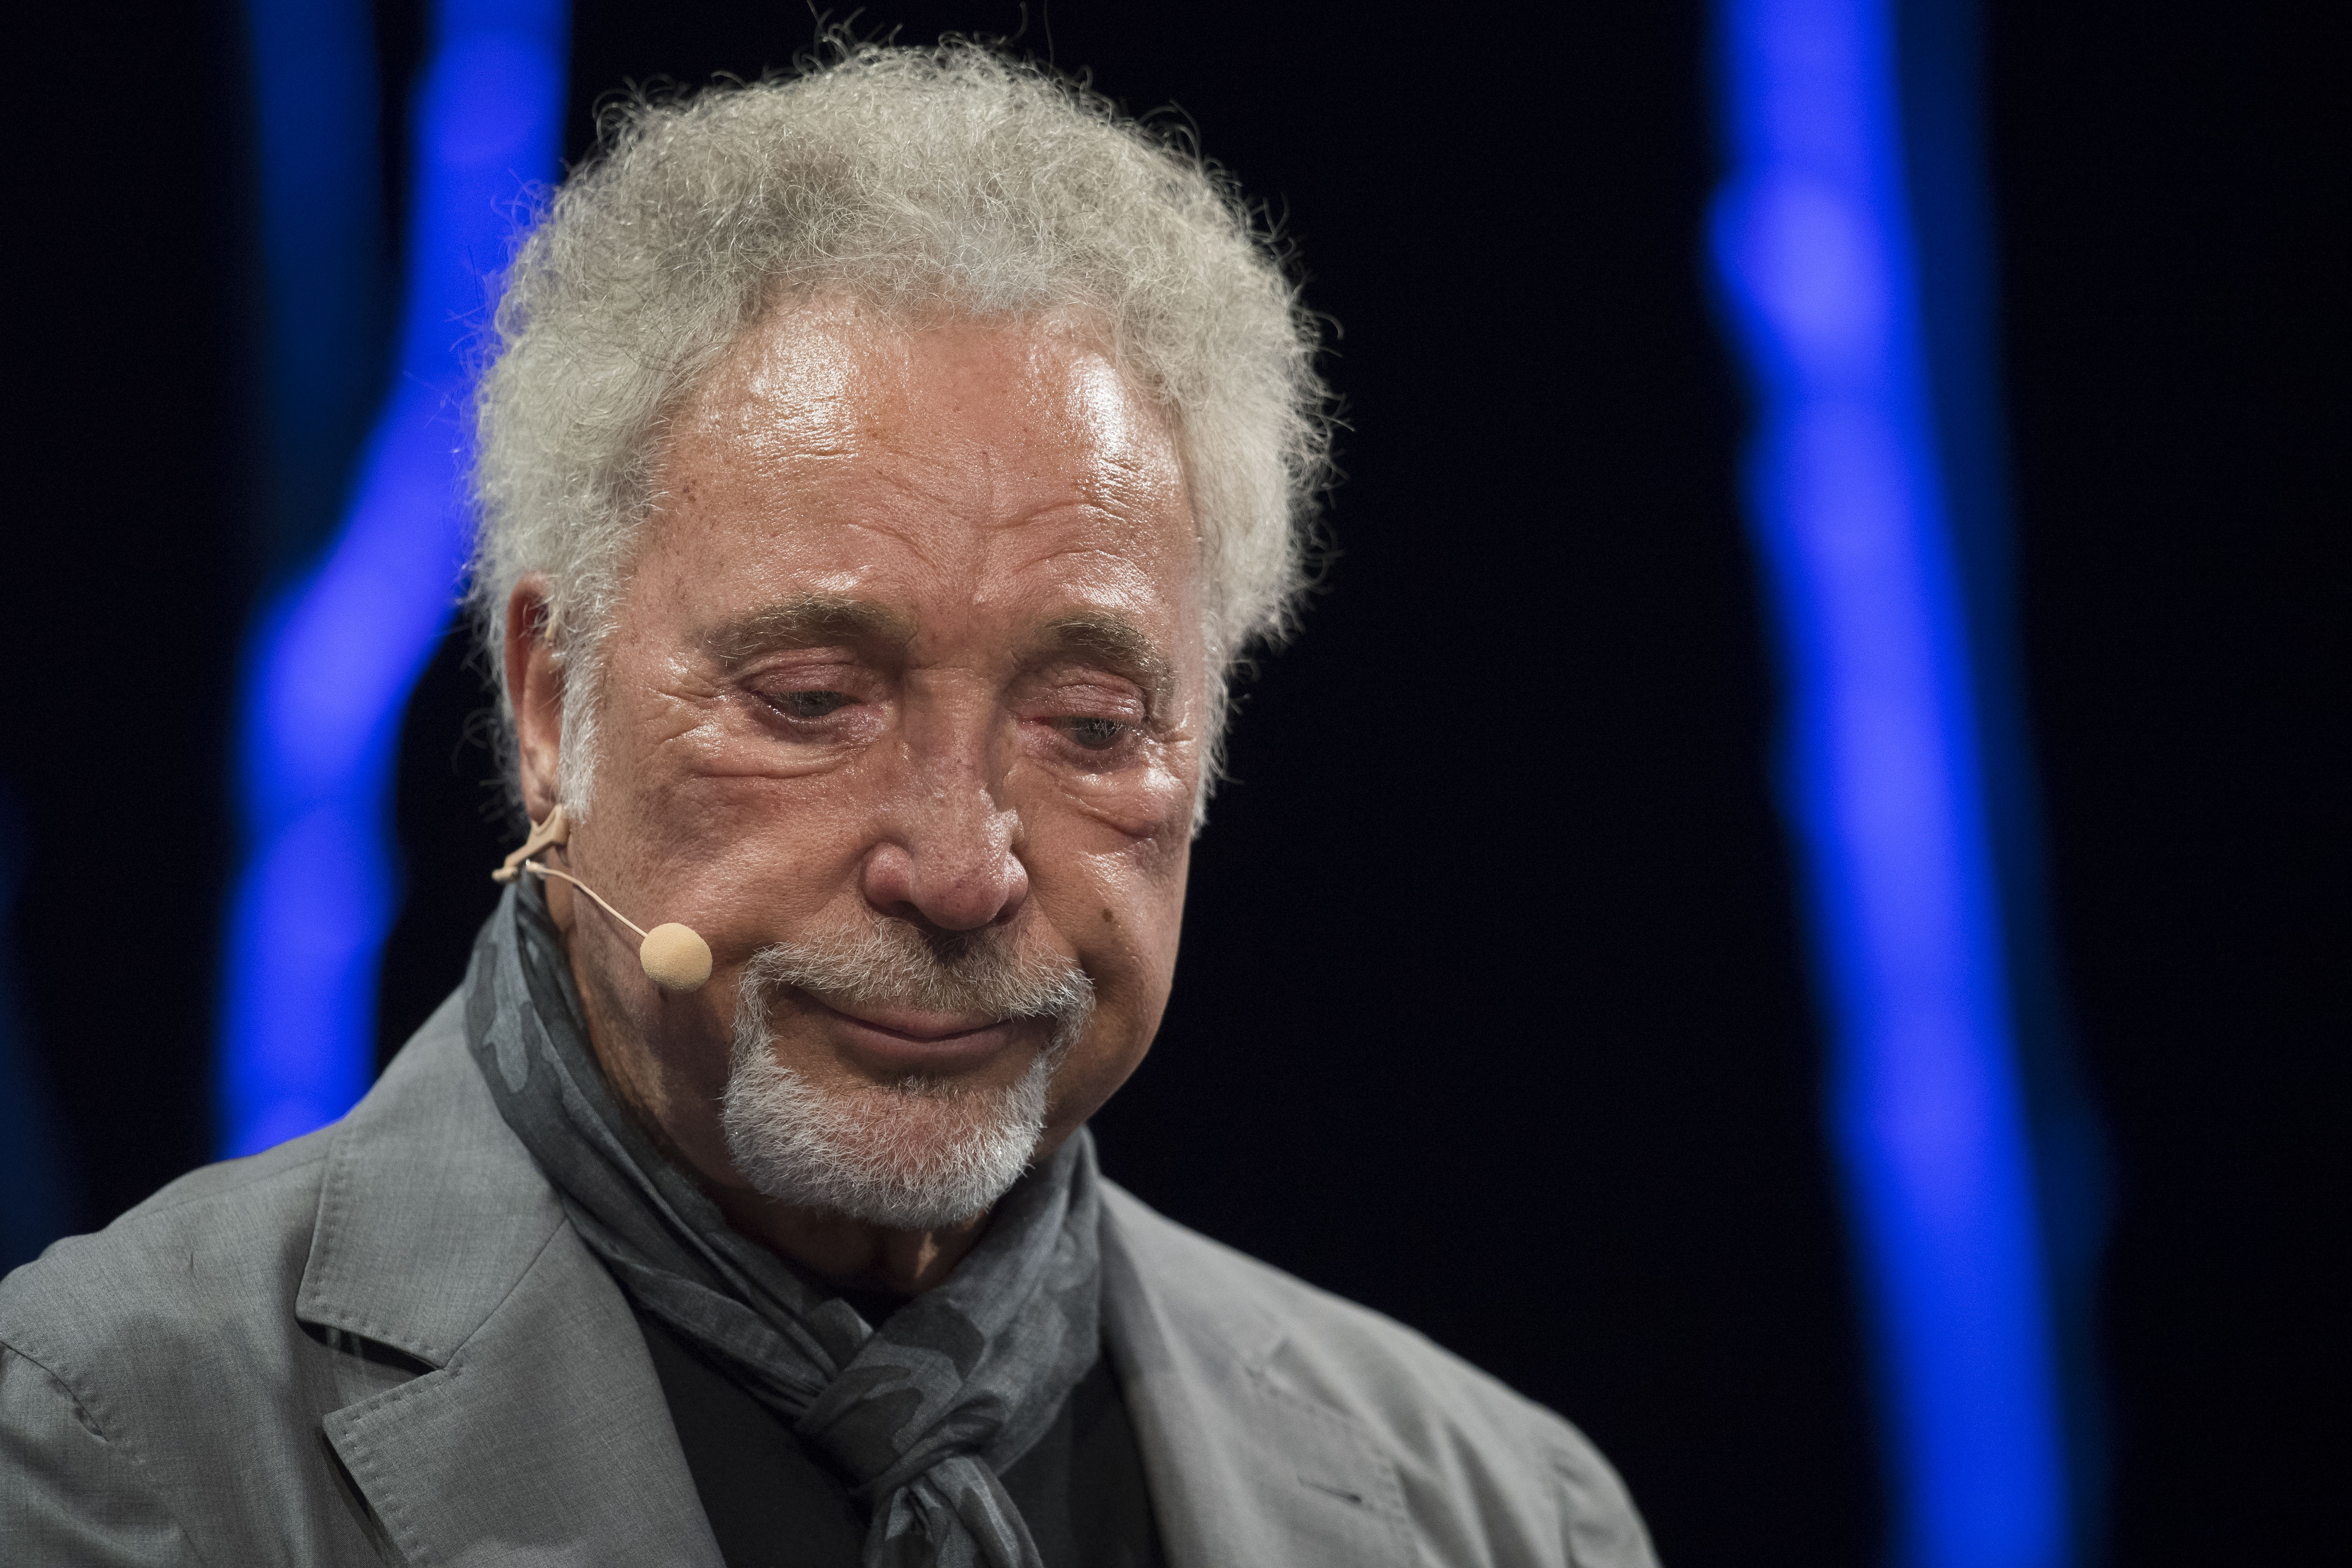 Tom Jones during the 2016 Hay Festival on June 5, 2016 in Hay-on-Wye, Wales | Source: Getty Images